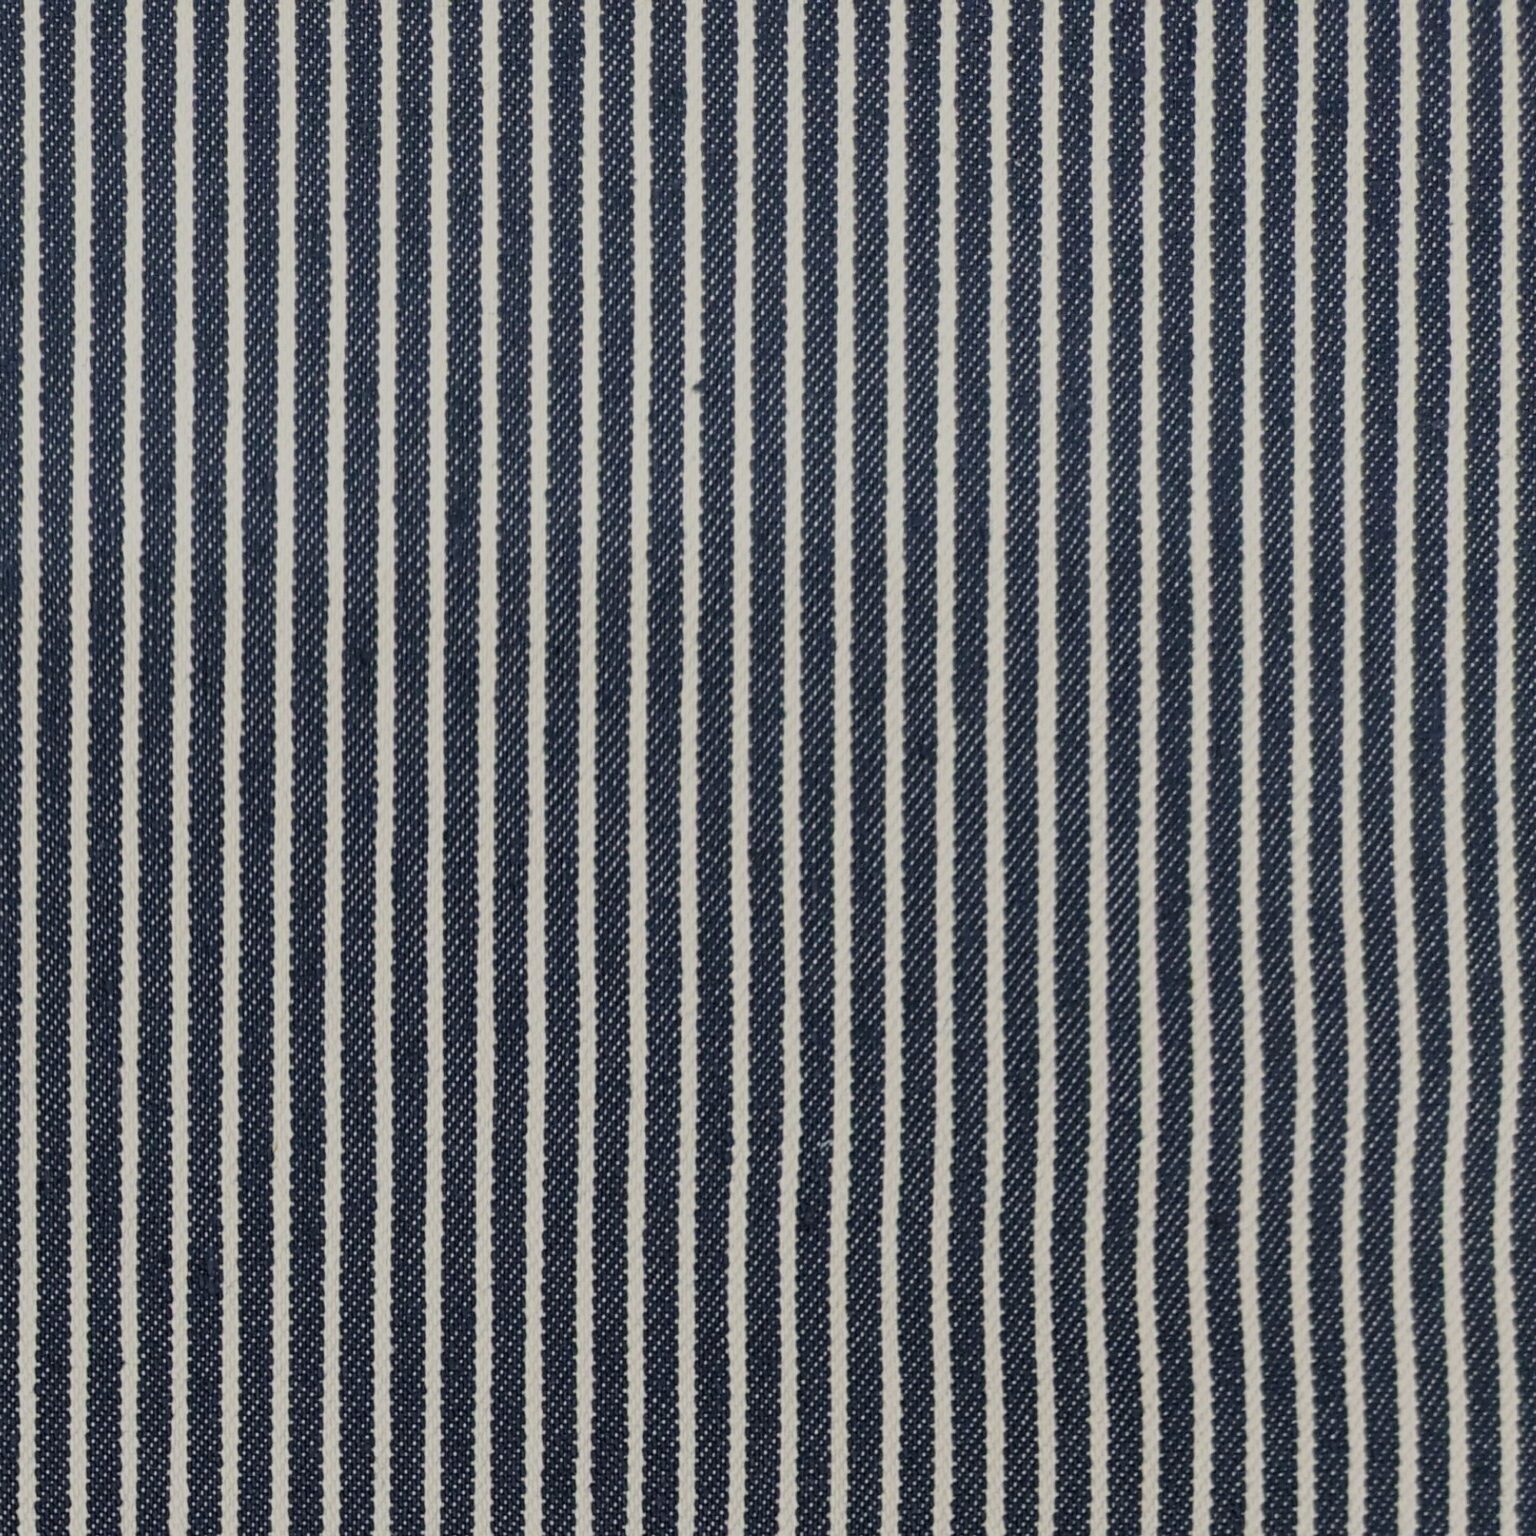 Yarn Dyed Stripe Denim Fabric - Washed Jeans Blue - 140cm Wide - More Sewing